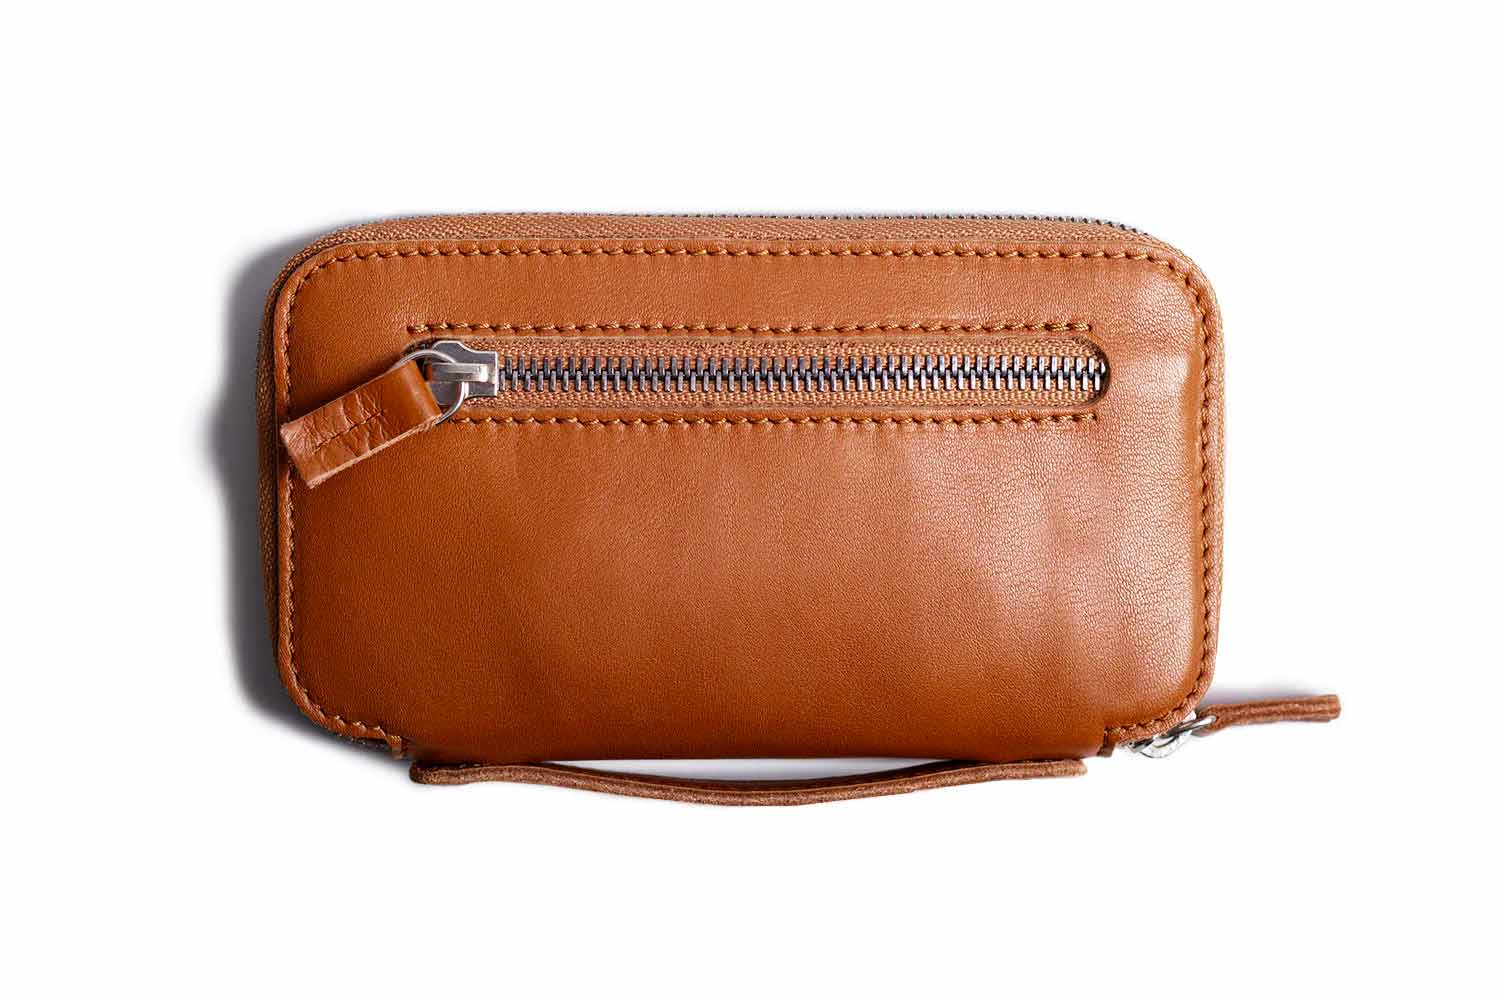 Harber London Leather Zip Coin Wallet